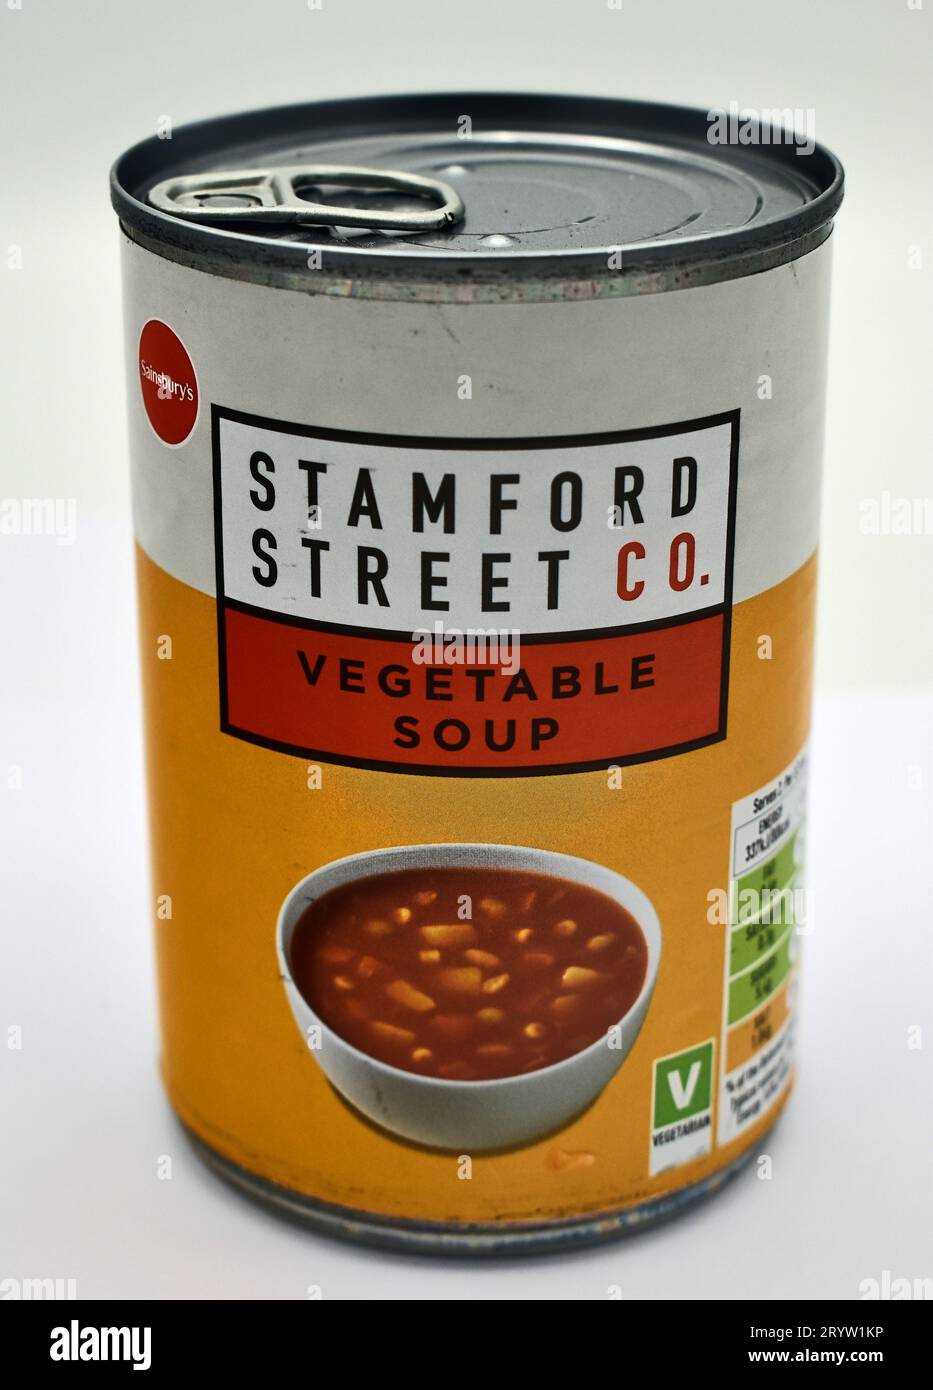 Sainsbury's supermarket has moved its value brands, including tinned soup, to a new label - Stamford Street Co. Stock Photo